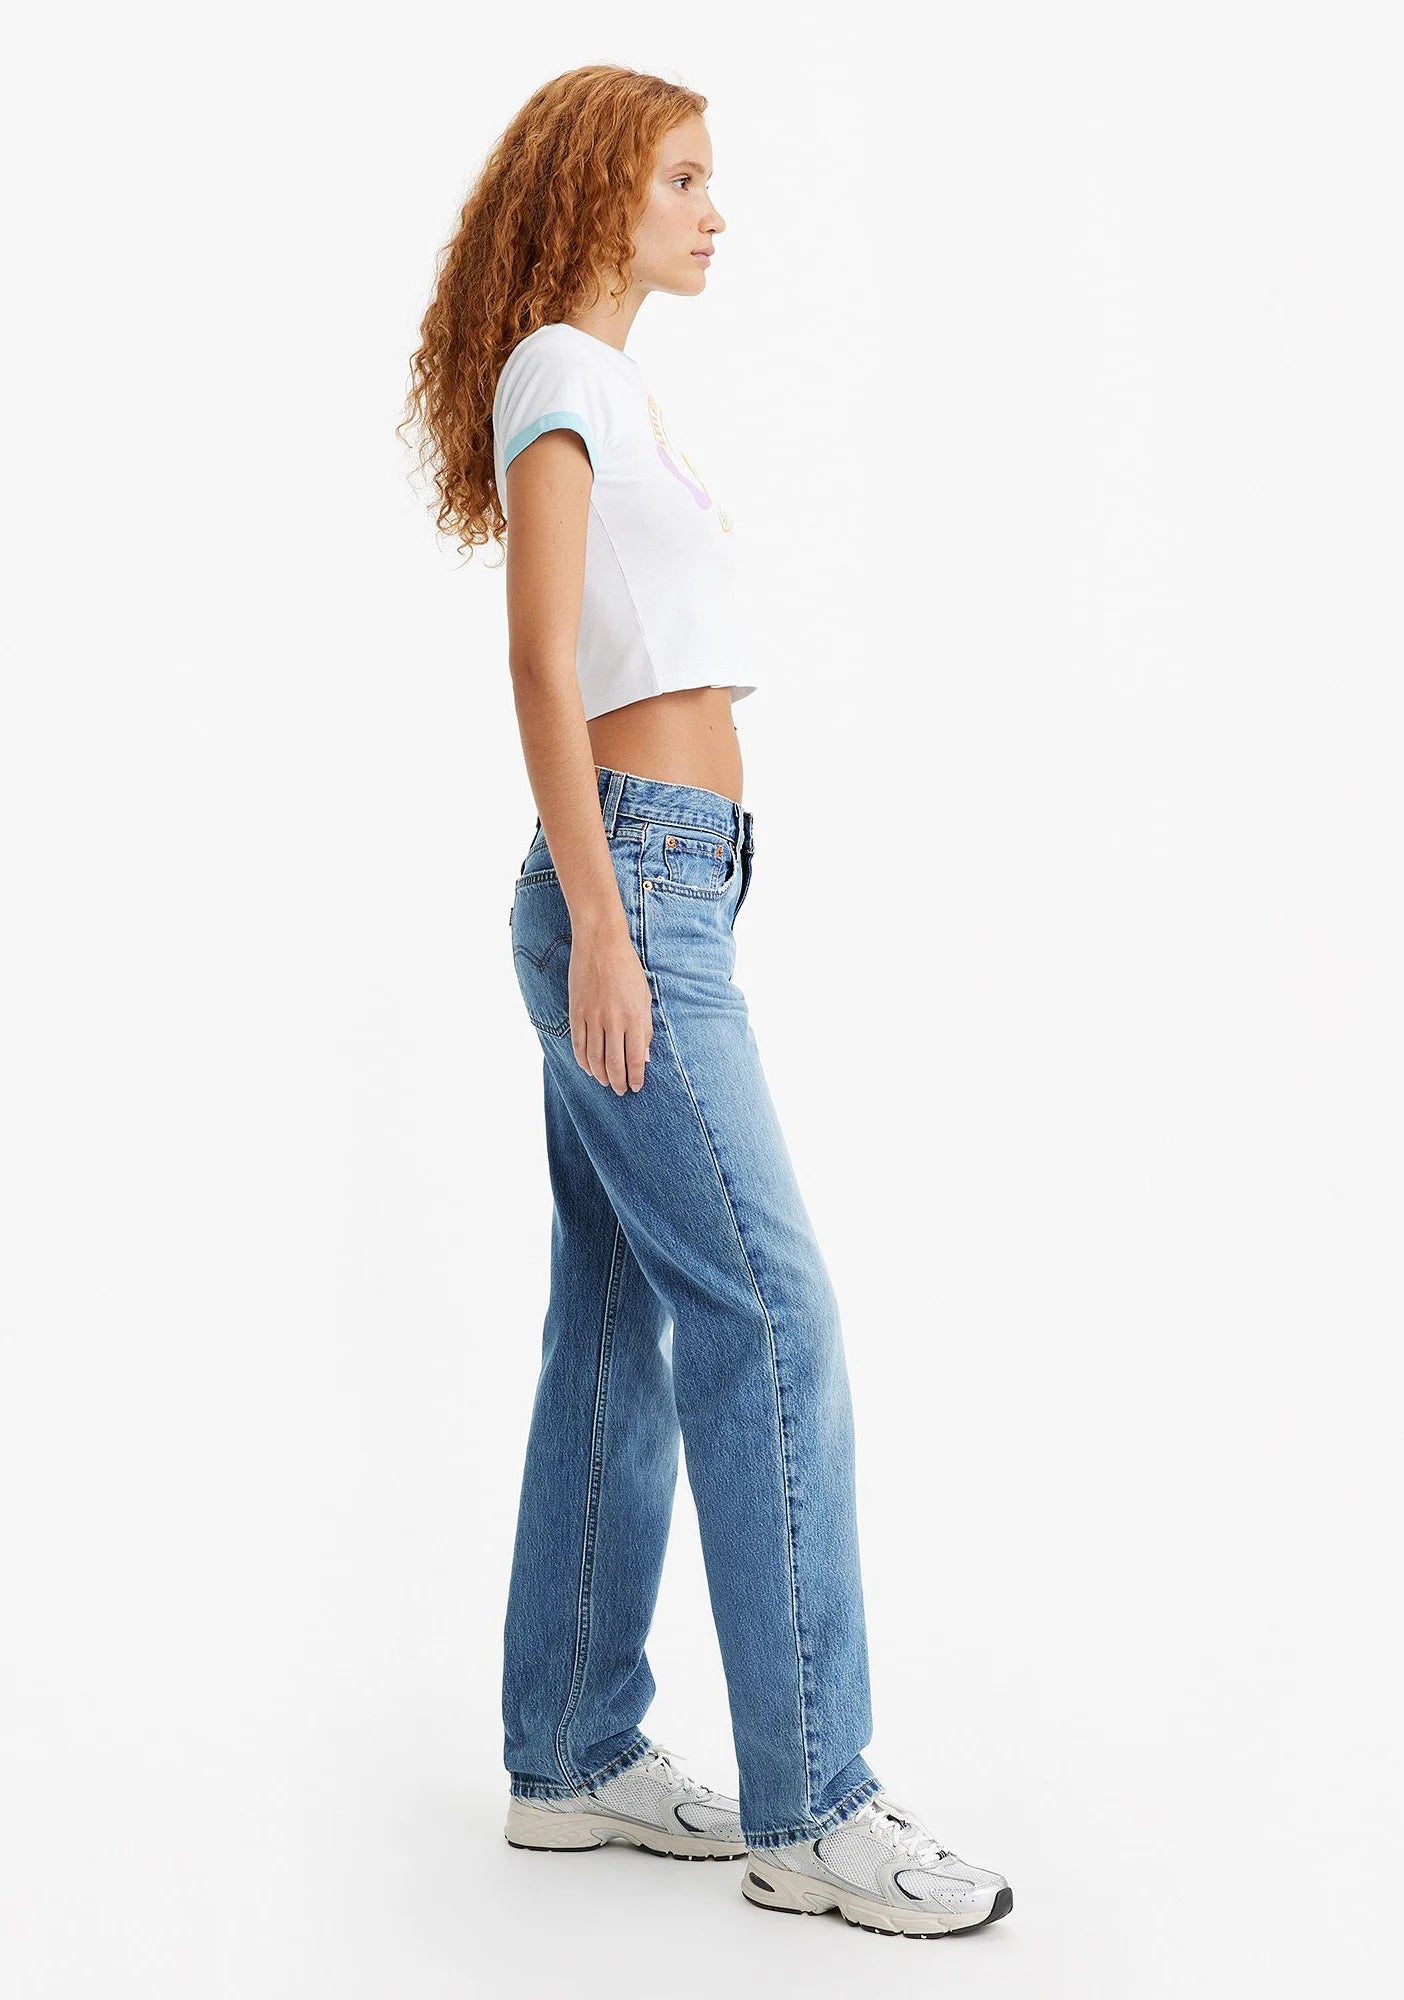 LOW PRO JEANS - GO AHEAD